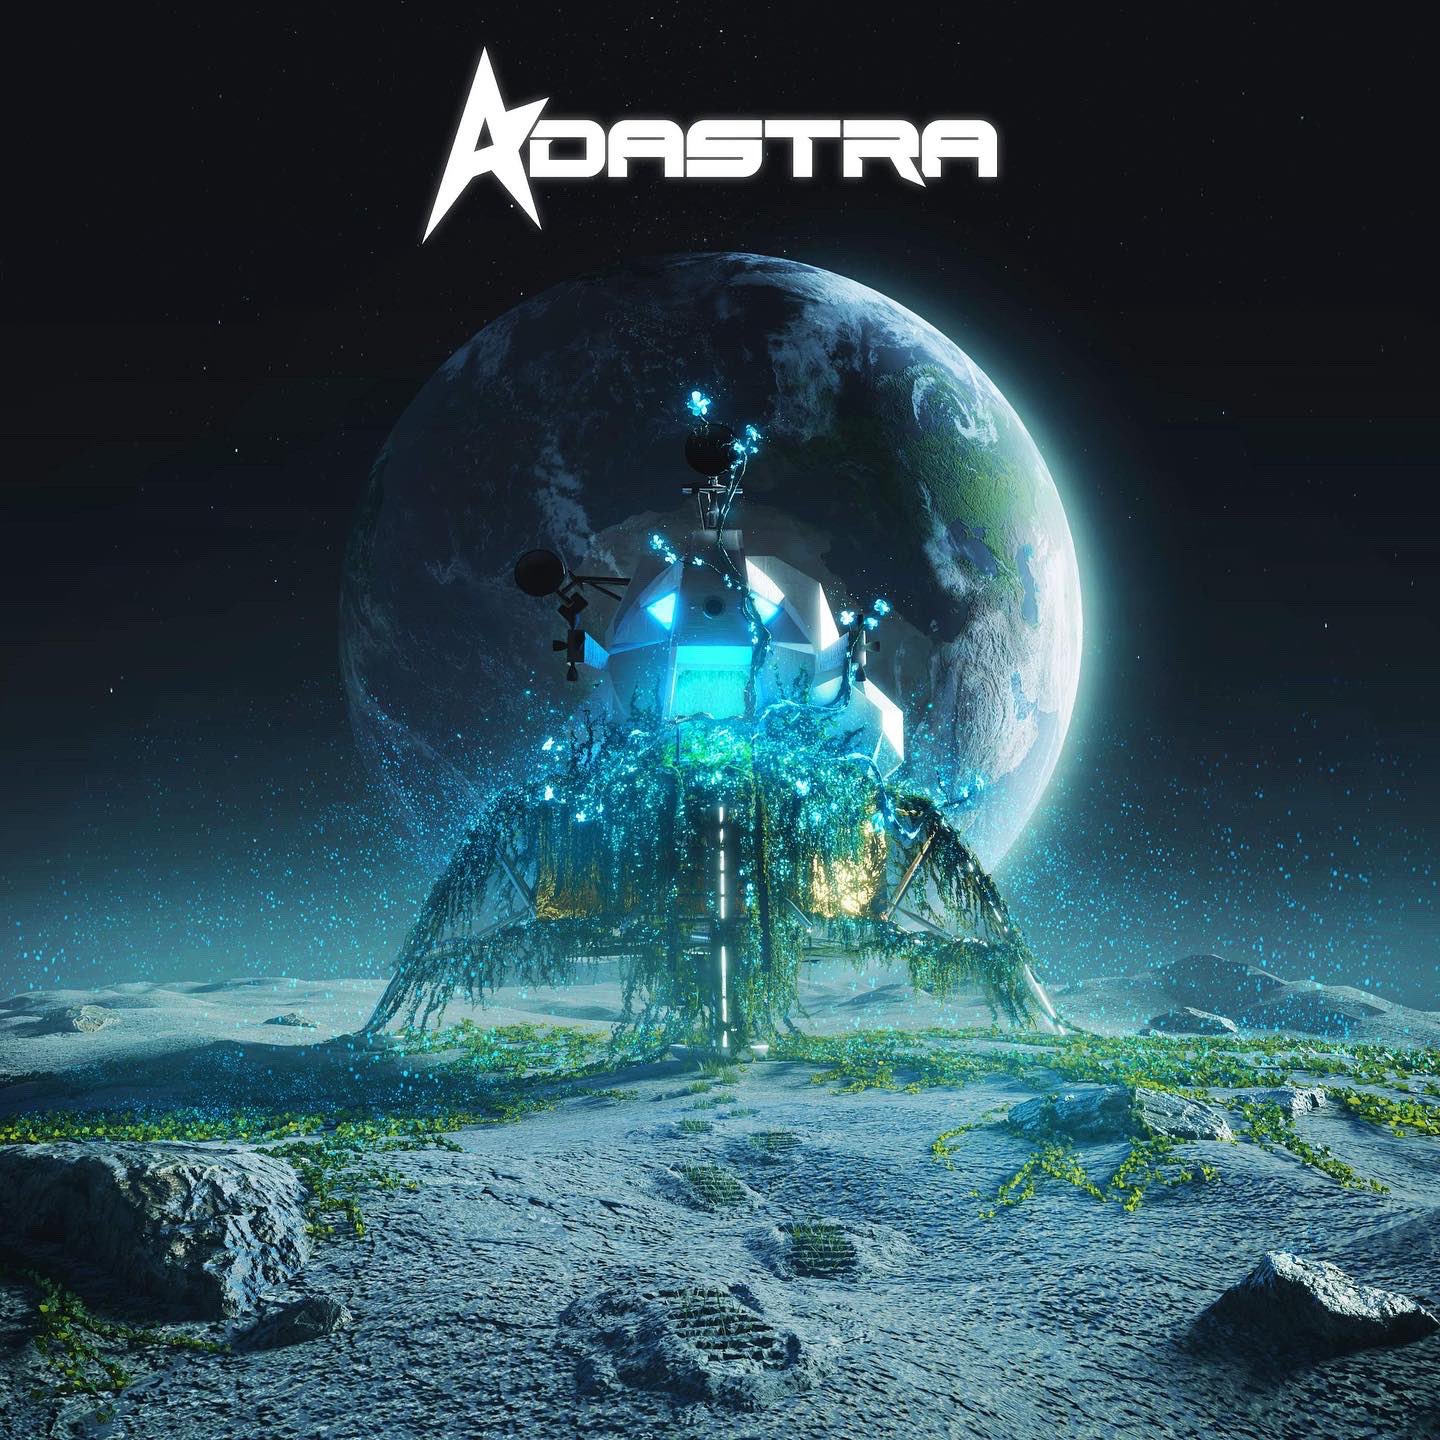 FEATURED LOCAL MUSIC: Apollo by Adastra